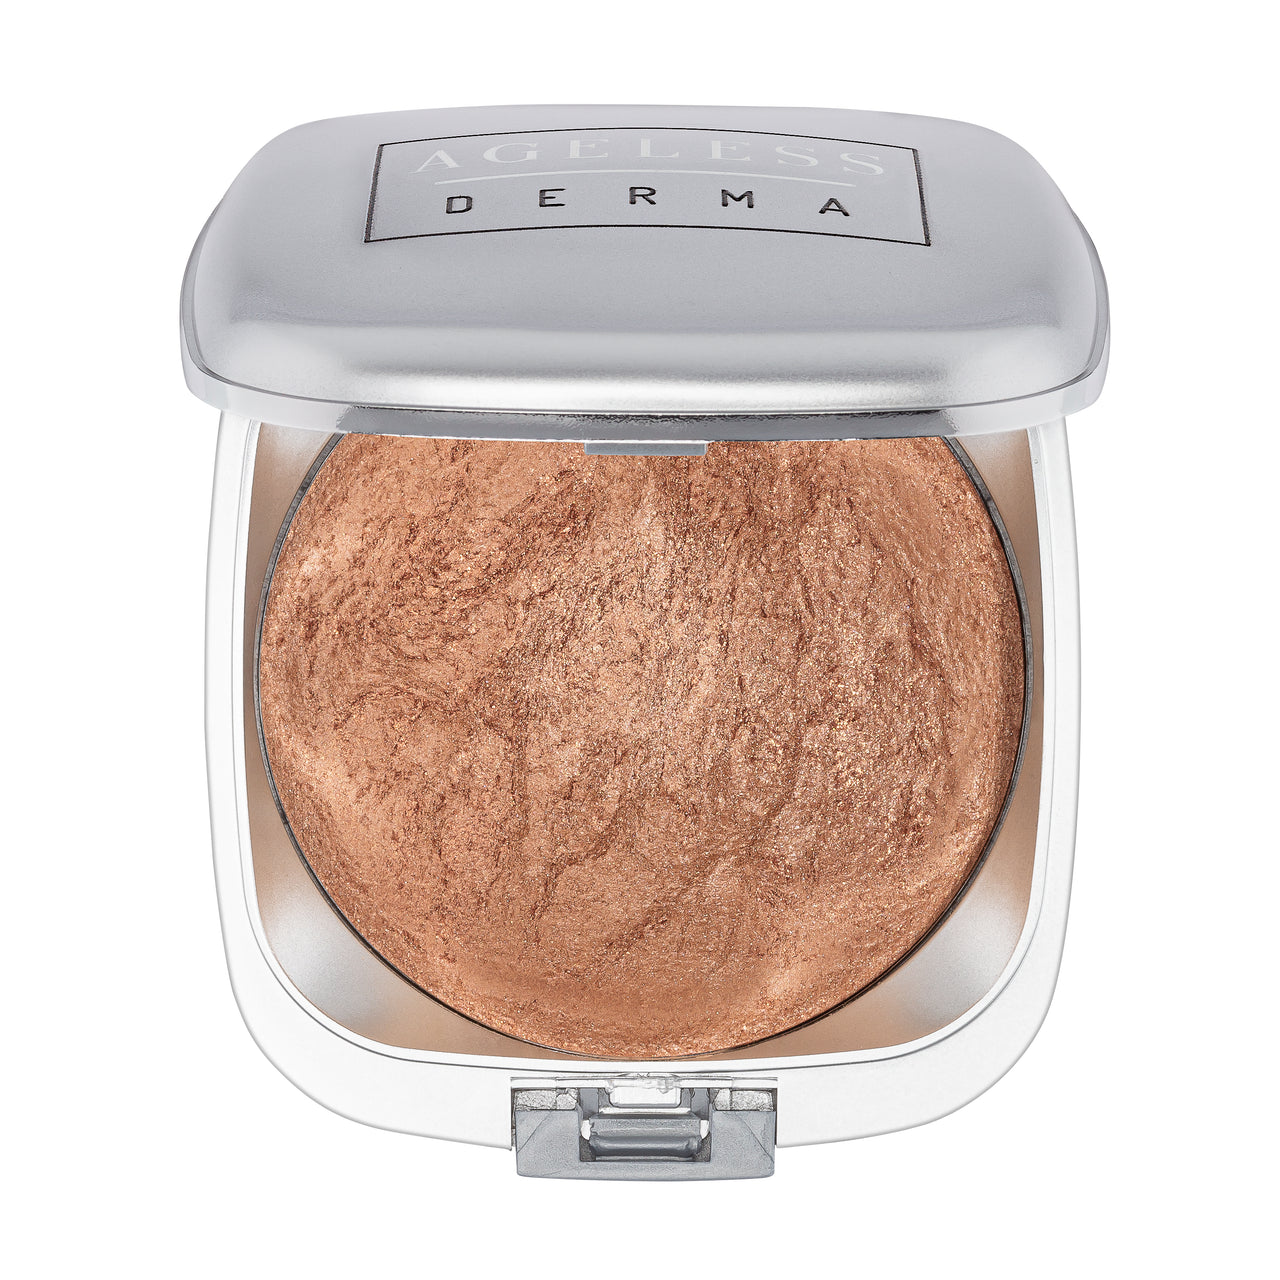 Baked Mineral Blush with Vitamin, Antioxidants and Botanical Extracts